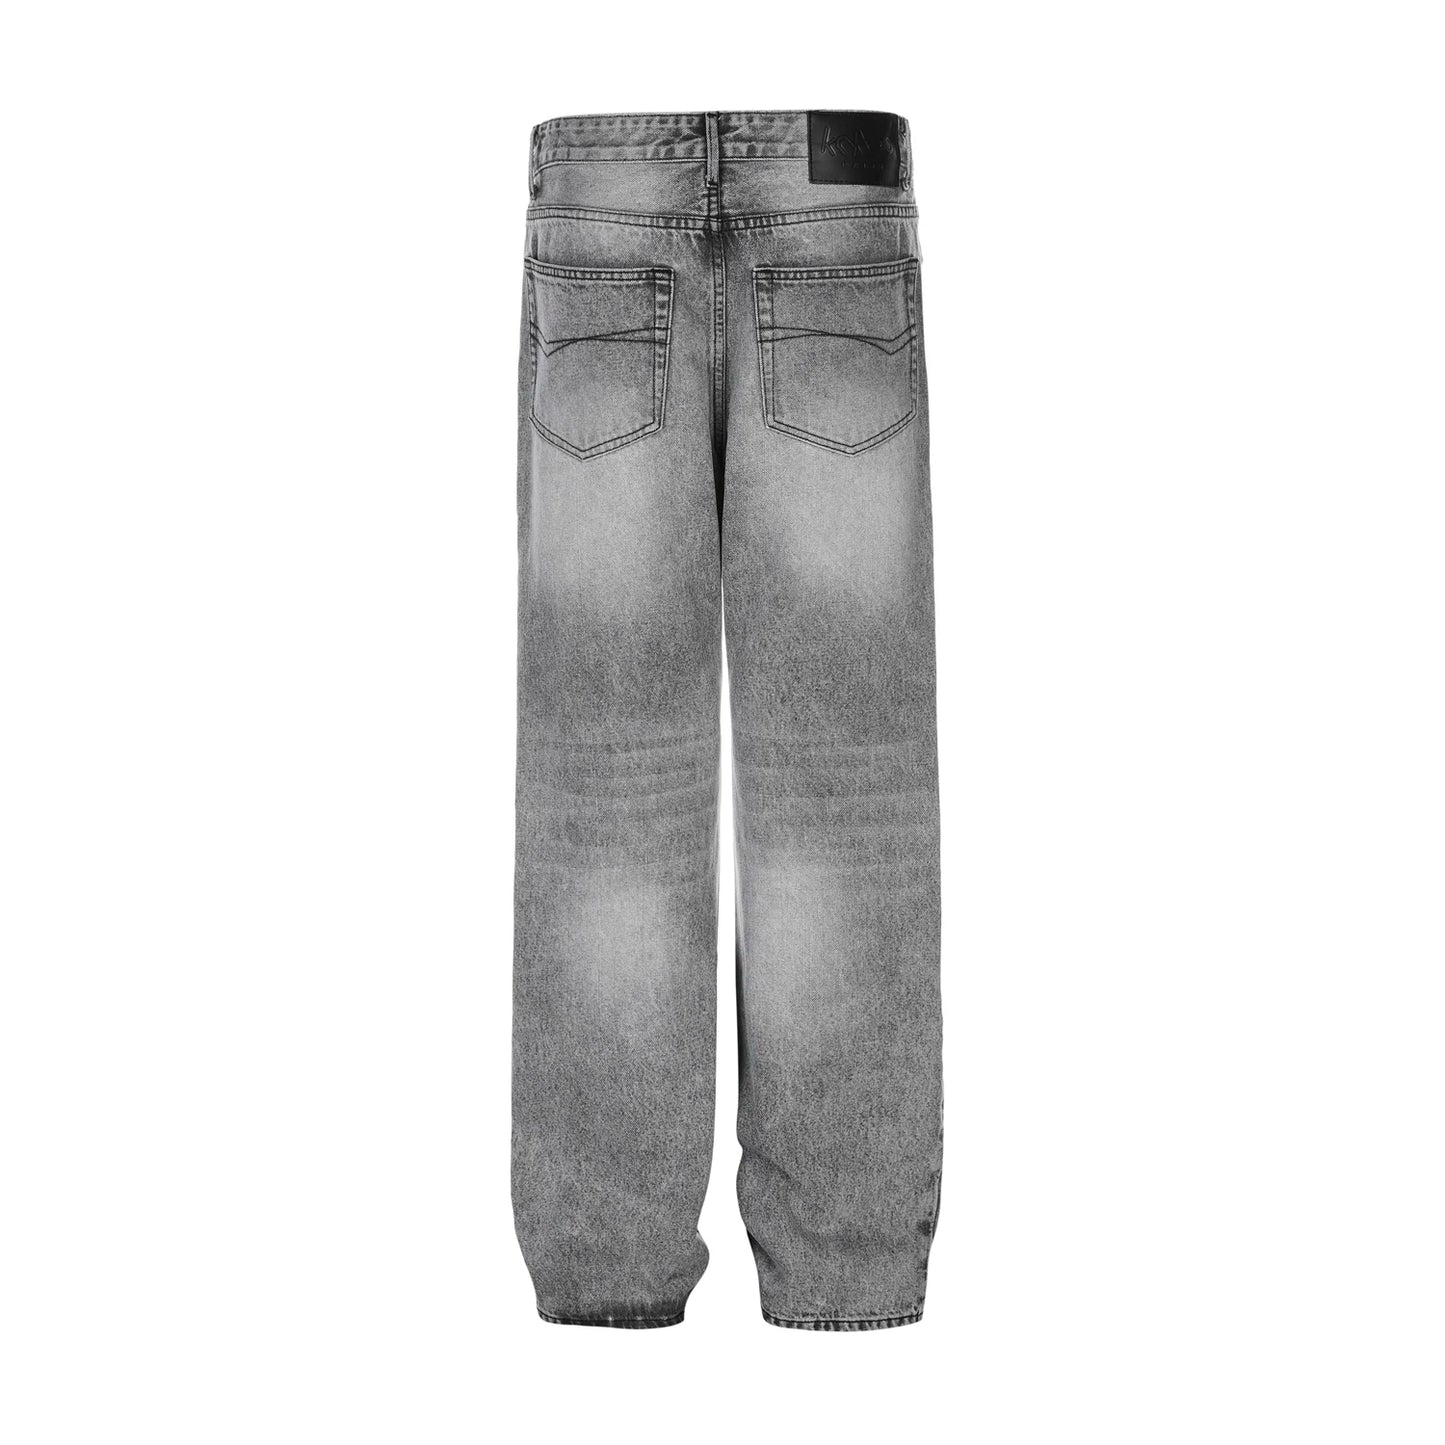 Haruja - Washed Damaged Ripped Grey Jeans